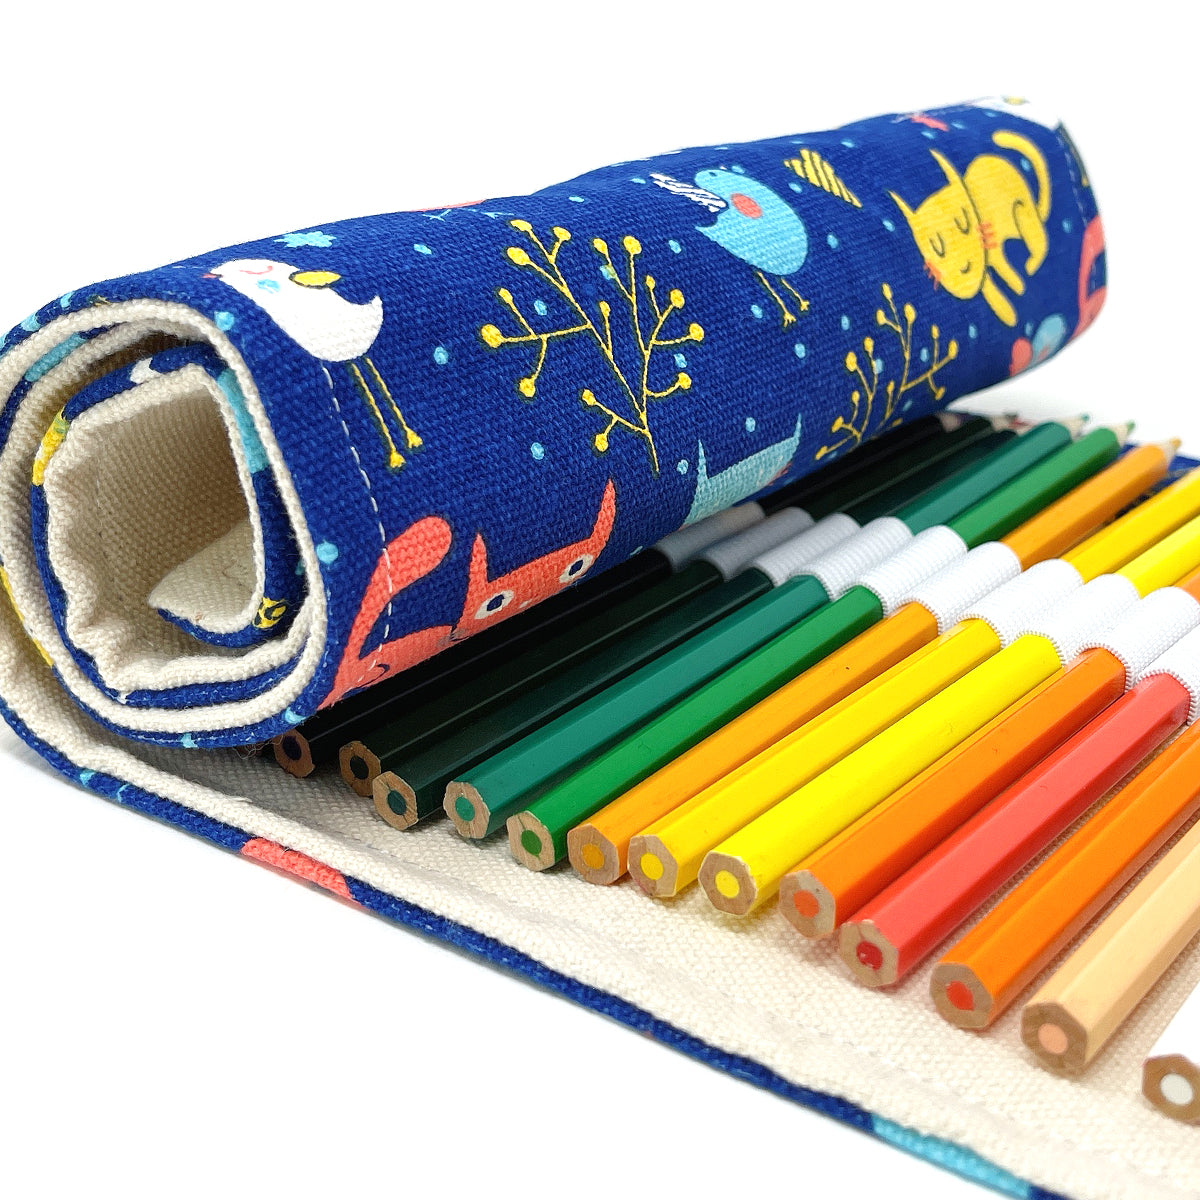 CREOOGO Colored Pencils Case Wrap Roll Holder for Artist Adult Coloring  Travel Portable Canvas Storage Organizer with a Build-in Pouch Lovely  Animals